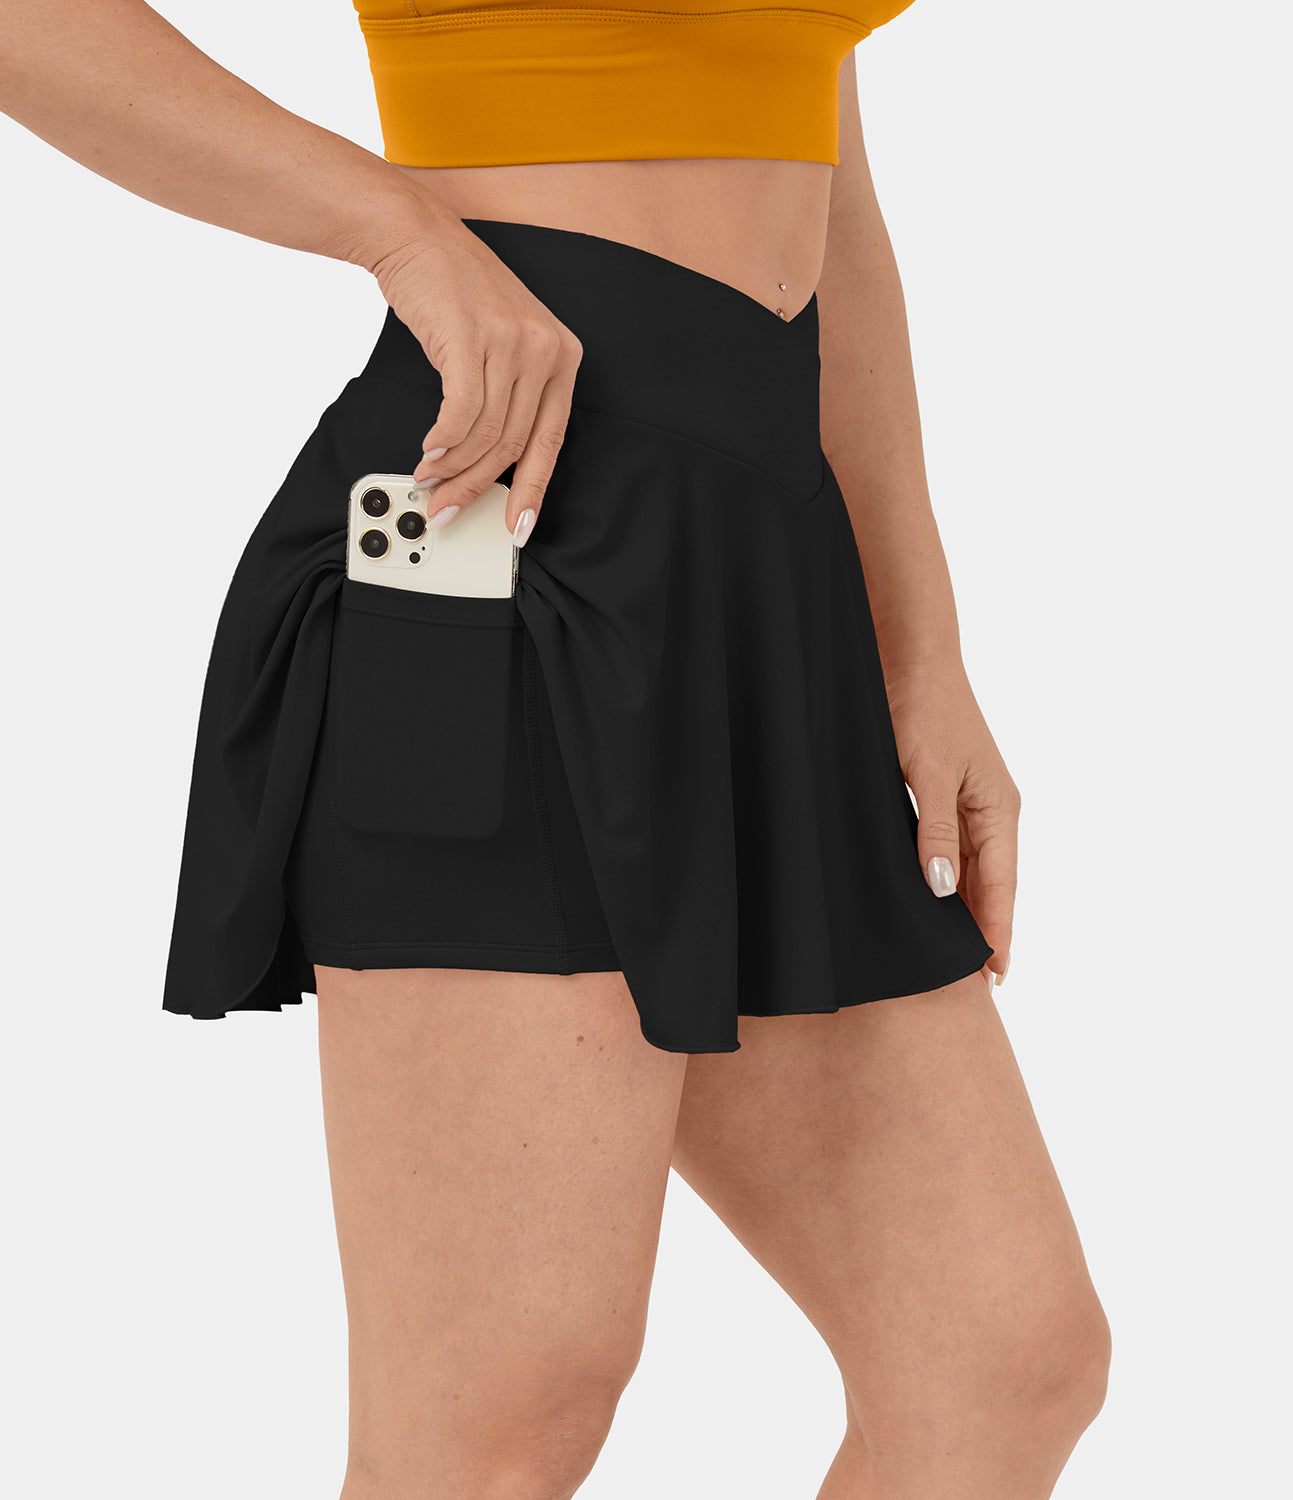 

Halara Cloudfulв„ў Air Fabric High Waisted Crossover 2-in-1 Side Pocket Flare Mini Cool Touch Tennis Skirt - Black